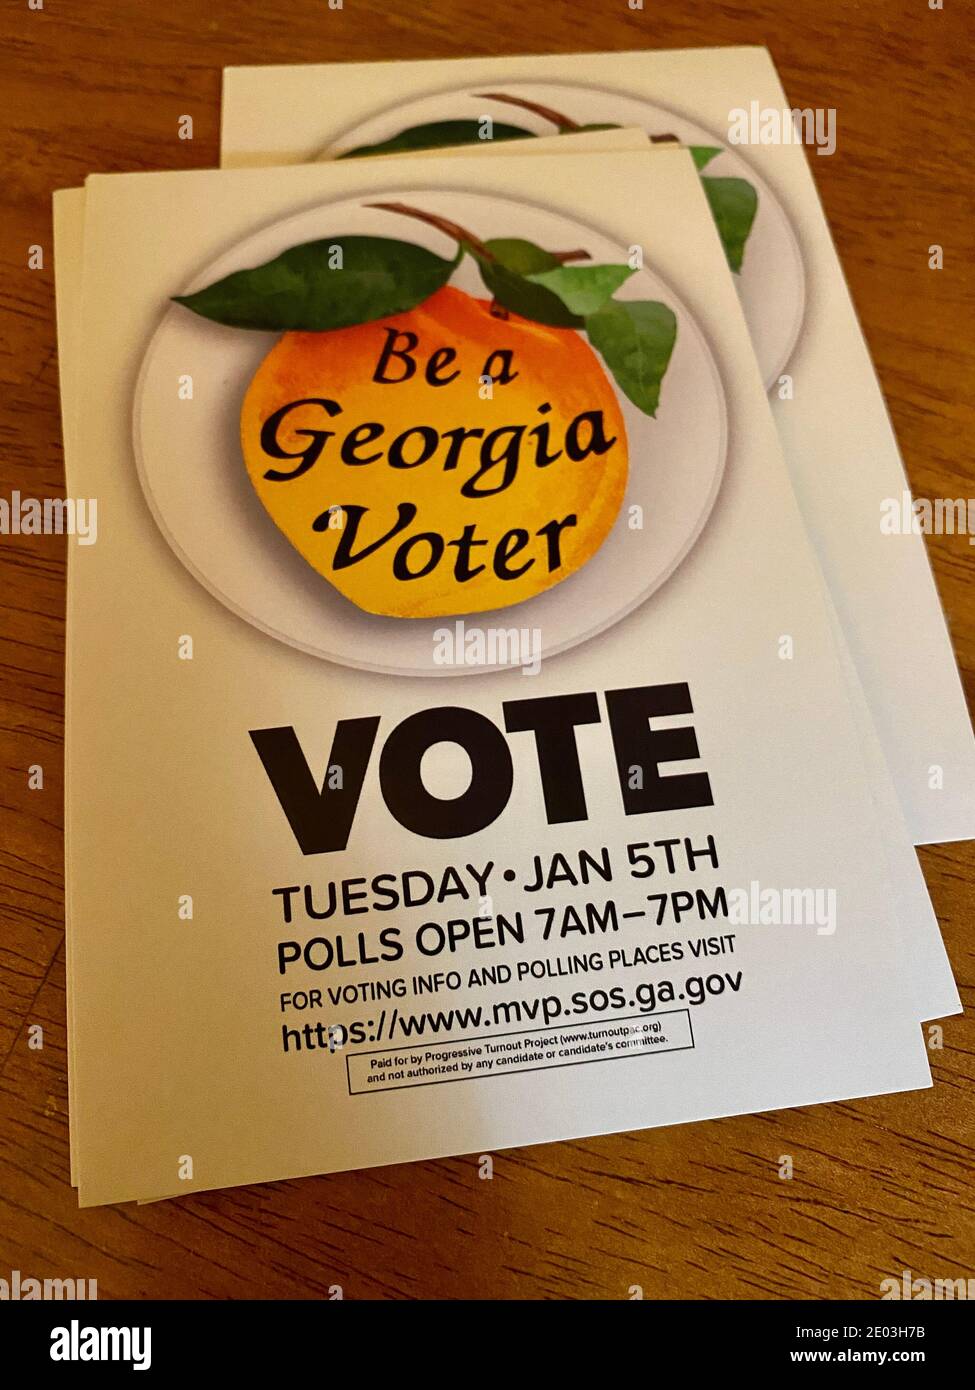 Postcards to Georgia voters encouraging them to vote in the Tuesday, January 5th Senate run-off election for Jon Ossoff and Rev. Warnock. Stock Photo